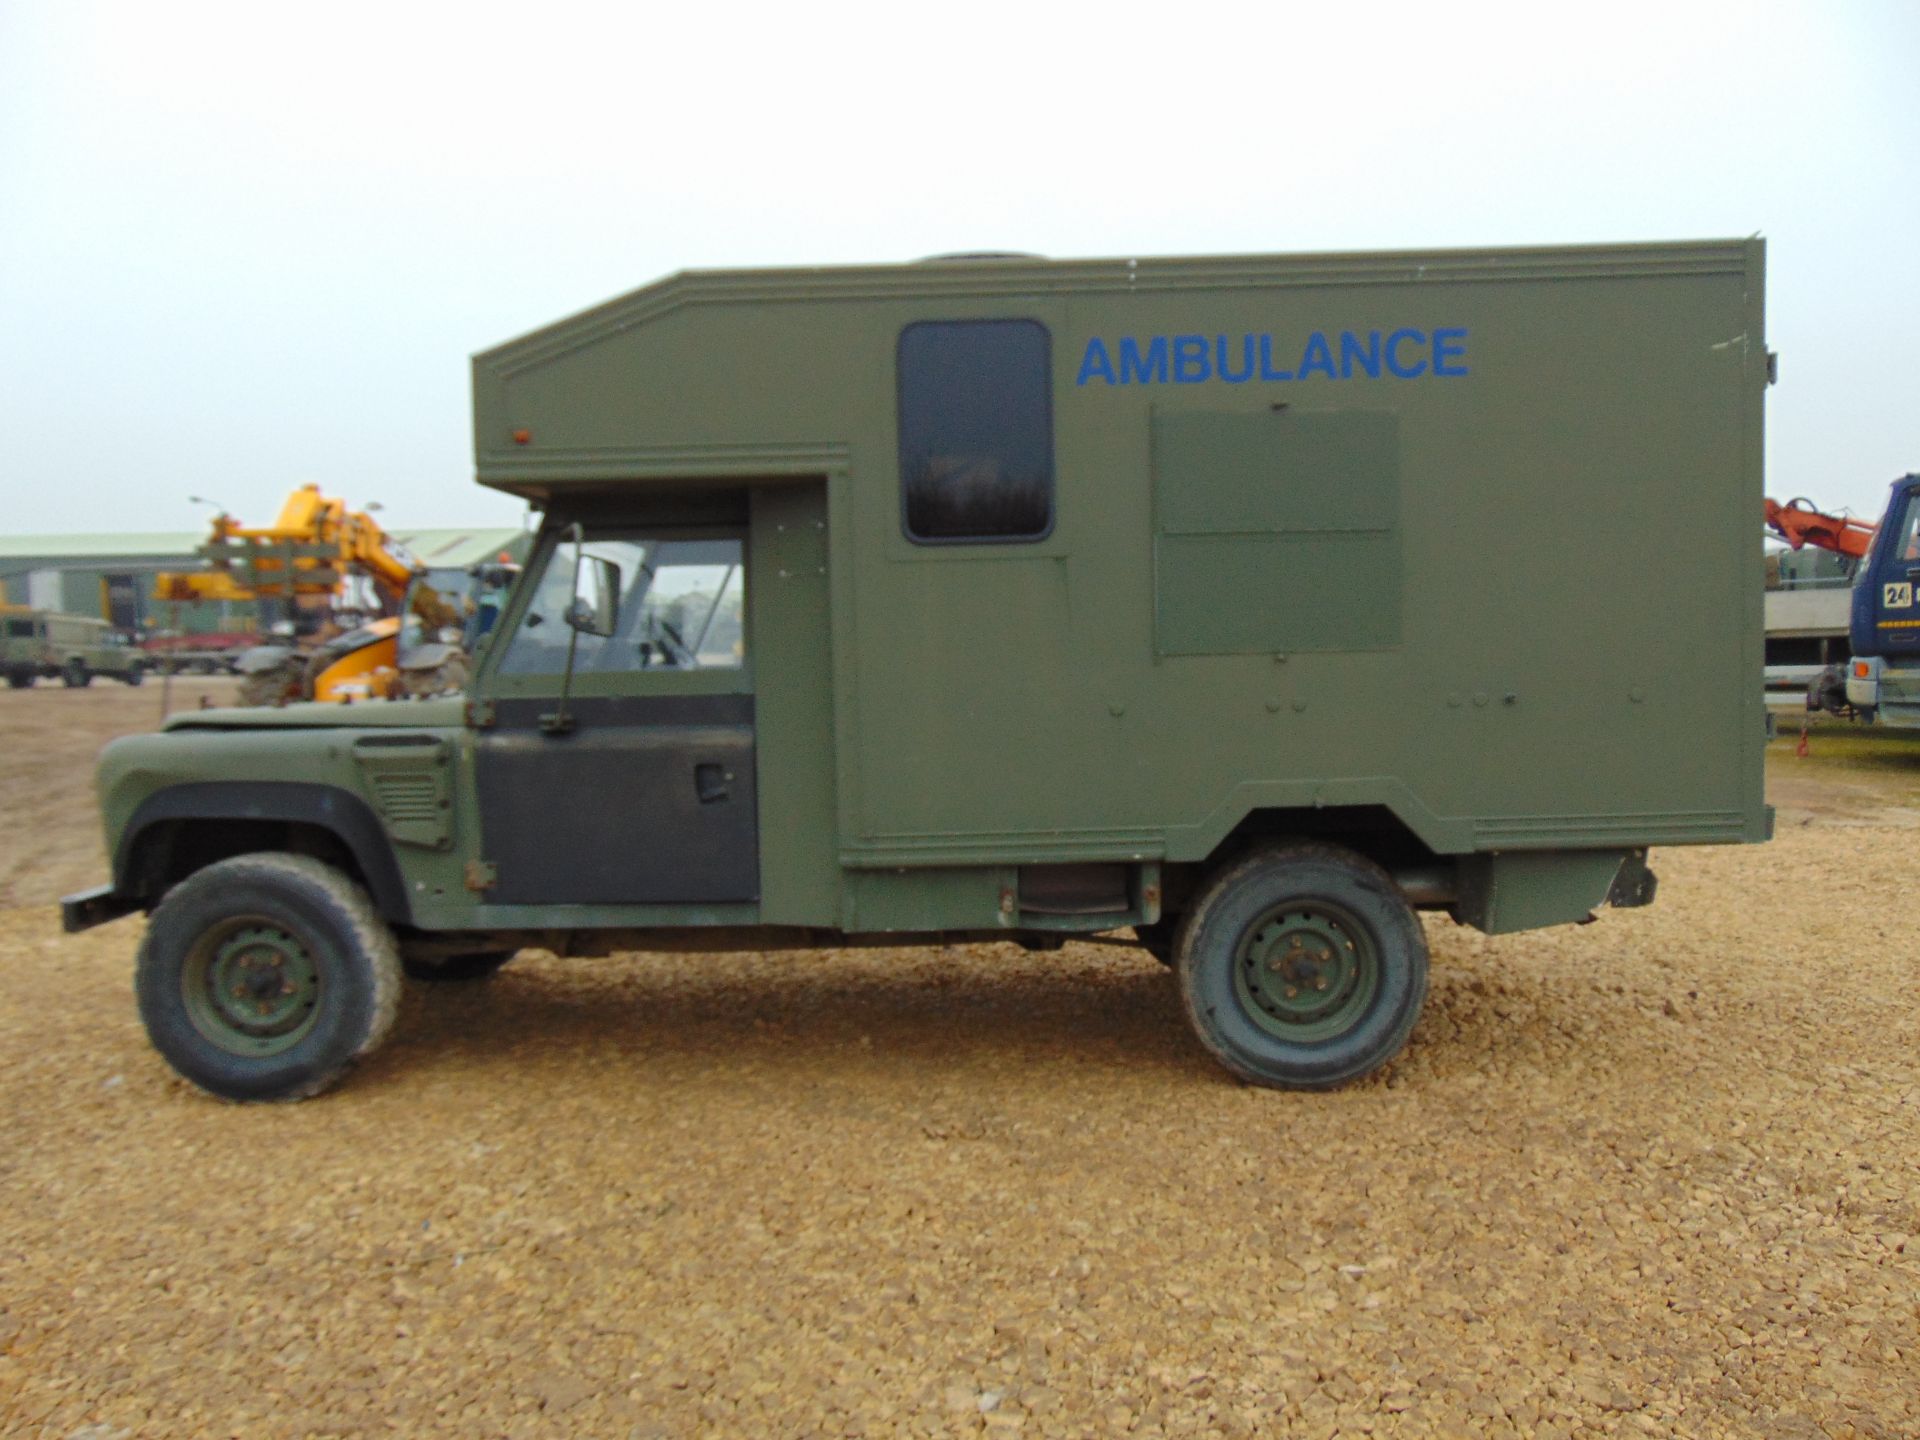 Military Specification Land Rover Wolf 130 ambulance - Image 4 of 19